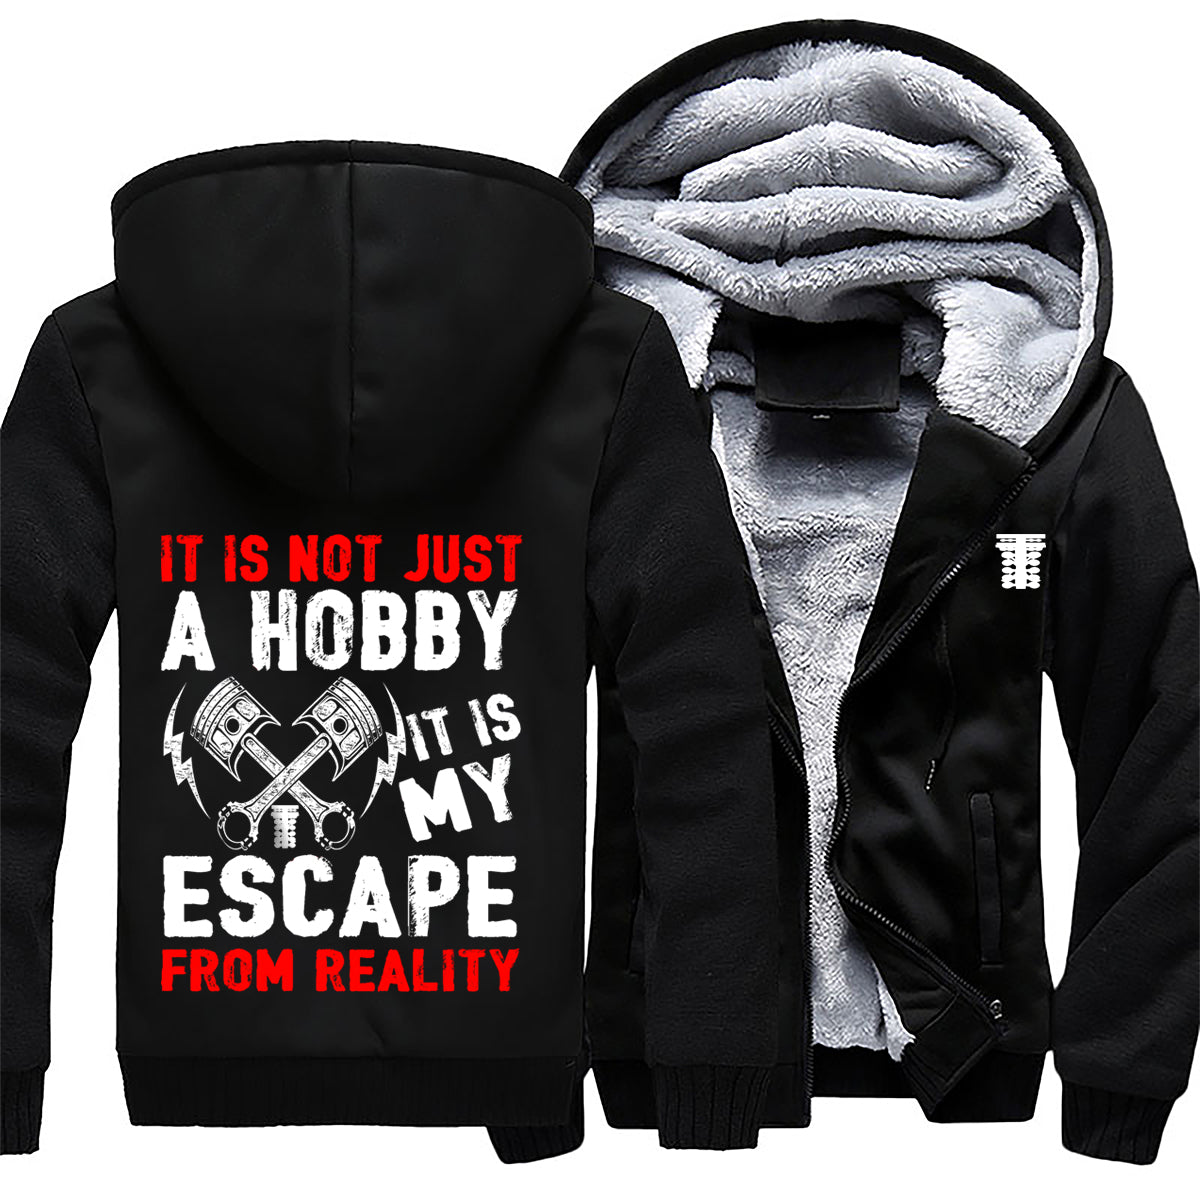 It's Not Just A Hobby It's My Escape From Reality Drag Racing Jacket 